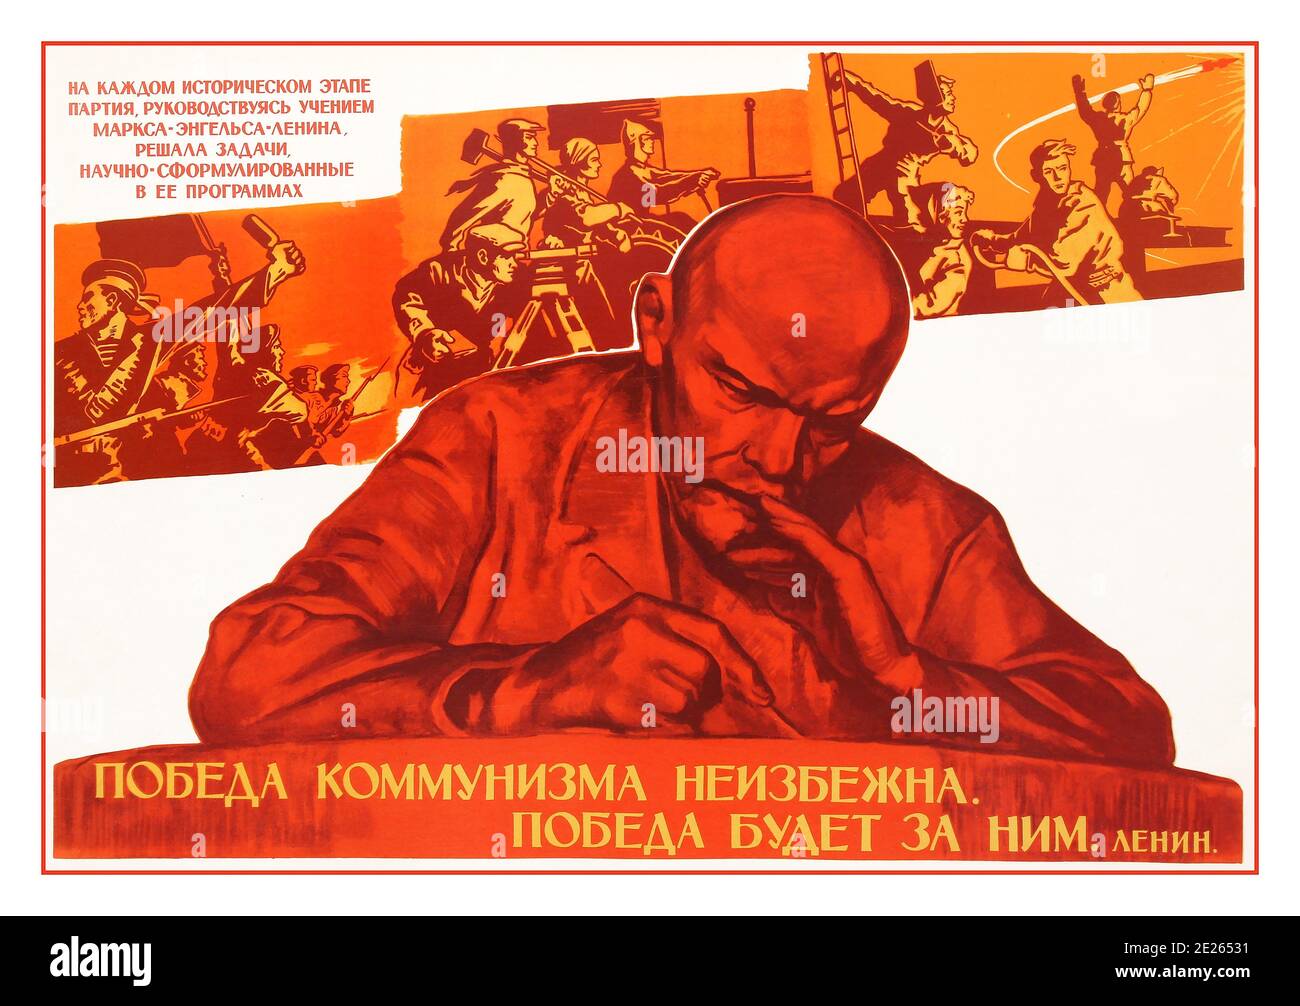 LENIN Vintage Soviet 1962 Propaganda poster from an official government series.. Soviet propaganda poster ‘The Victory of Communism is Inevitable’ featuring illustration of Lenin writing at a desk with industrial workers and rockets flying into space in the background. Horizontal Russia 1968 designer  E Solovyev, Stock Photo